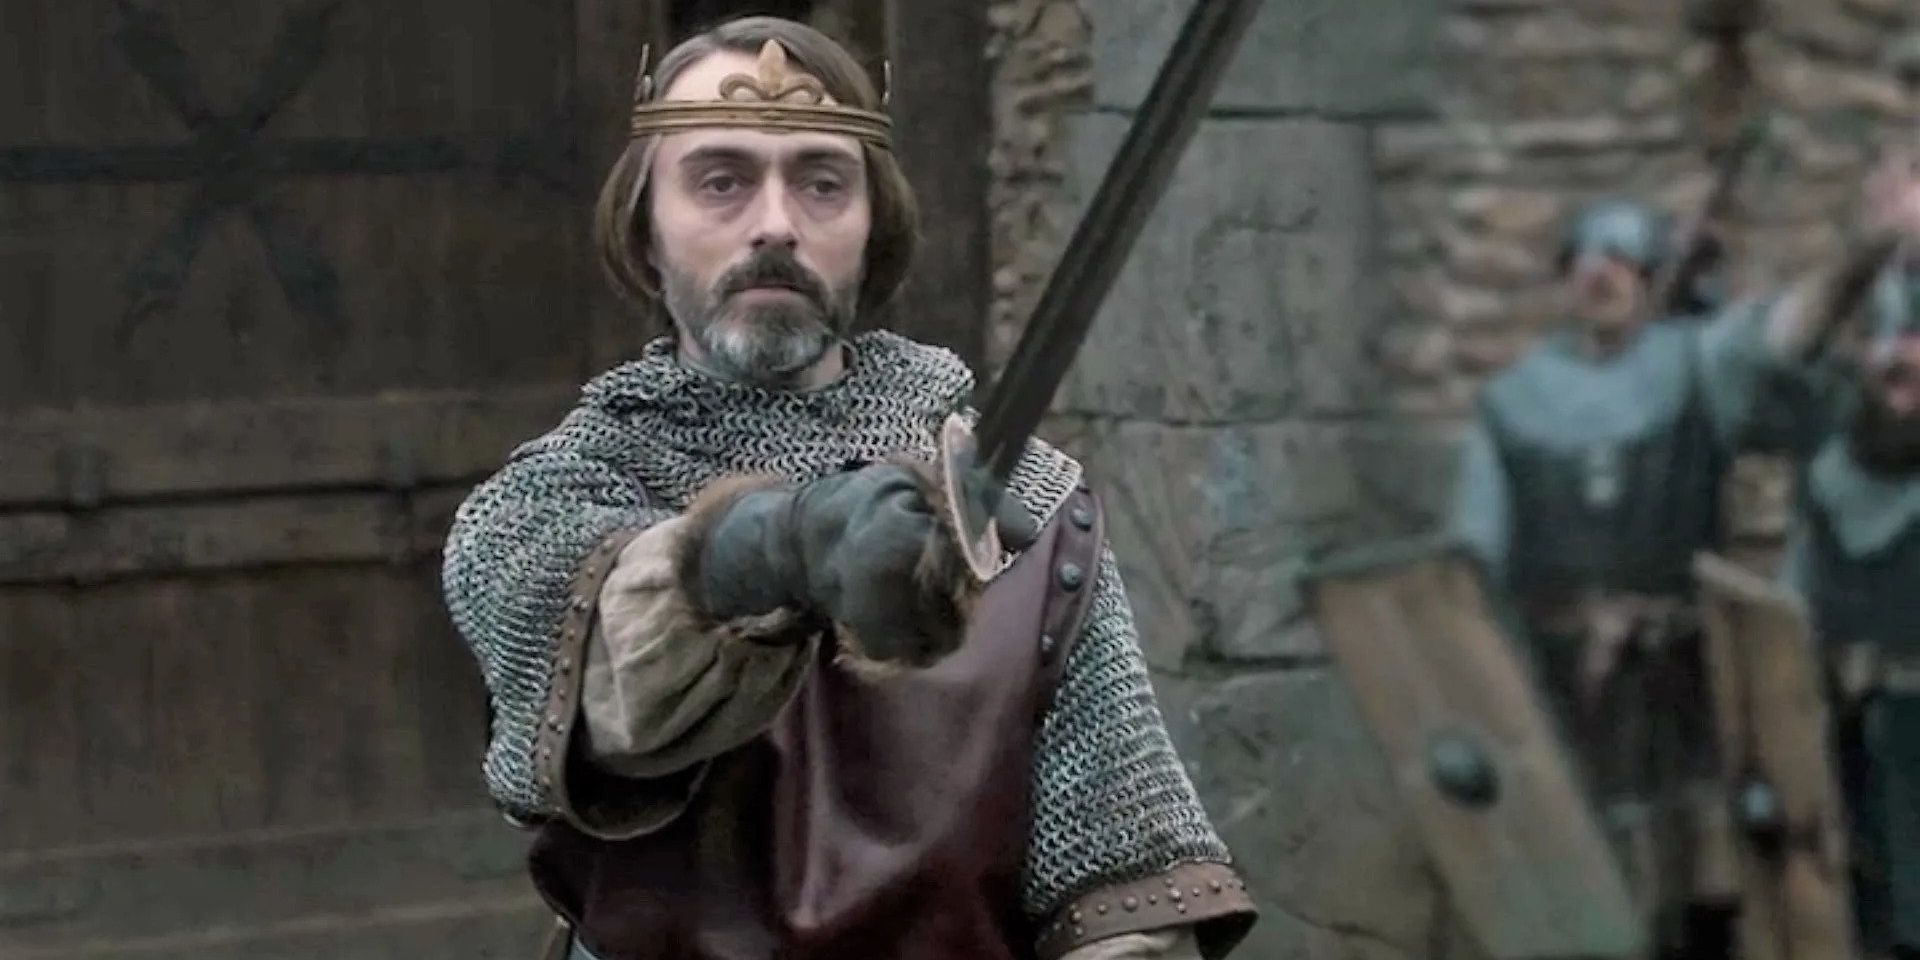 King Alfred pointing a sword in The Last Kingdom.